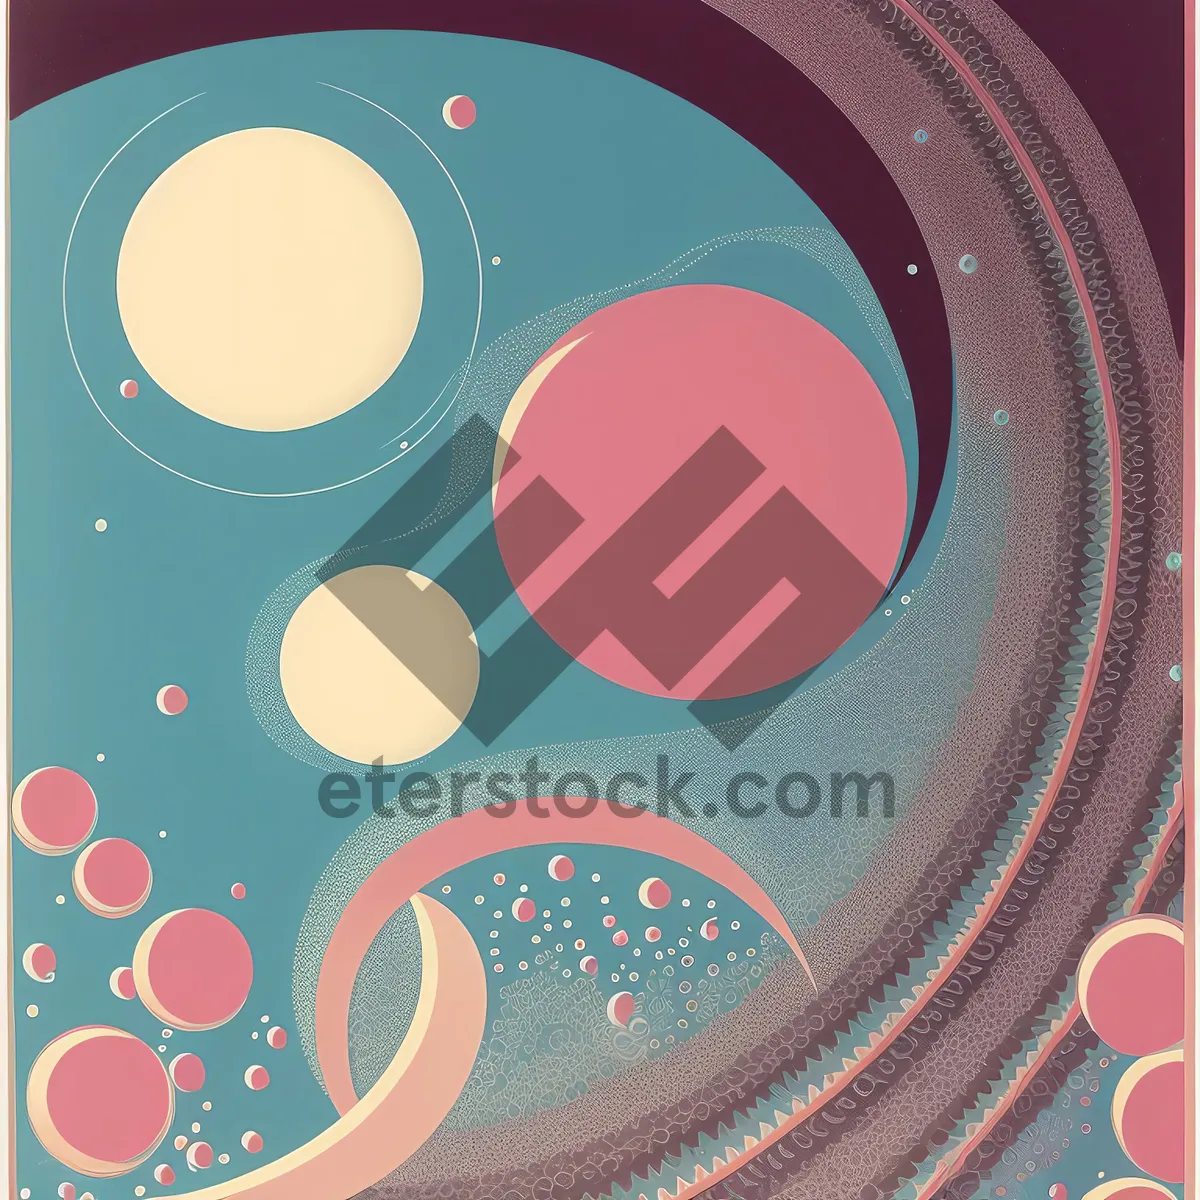 Picture of Patterned Water Droplets on Circle Design Wallpaper